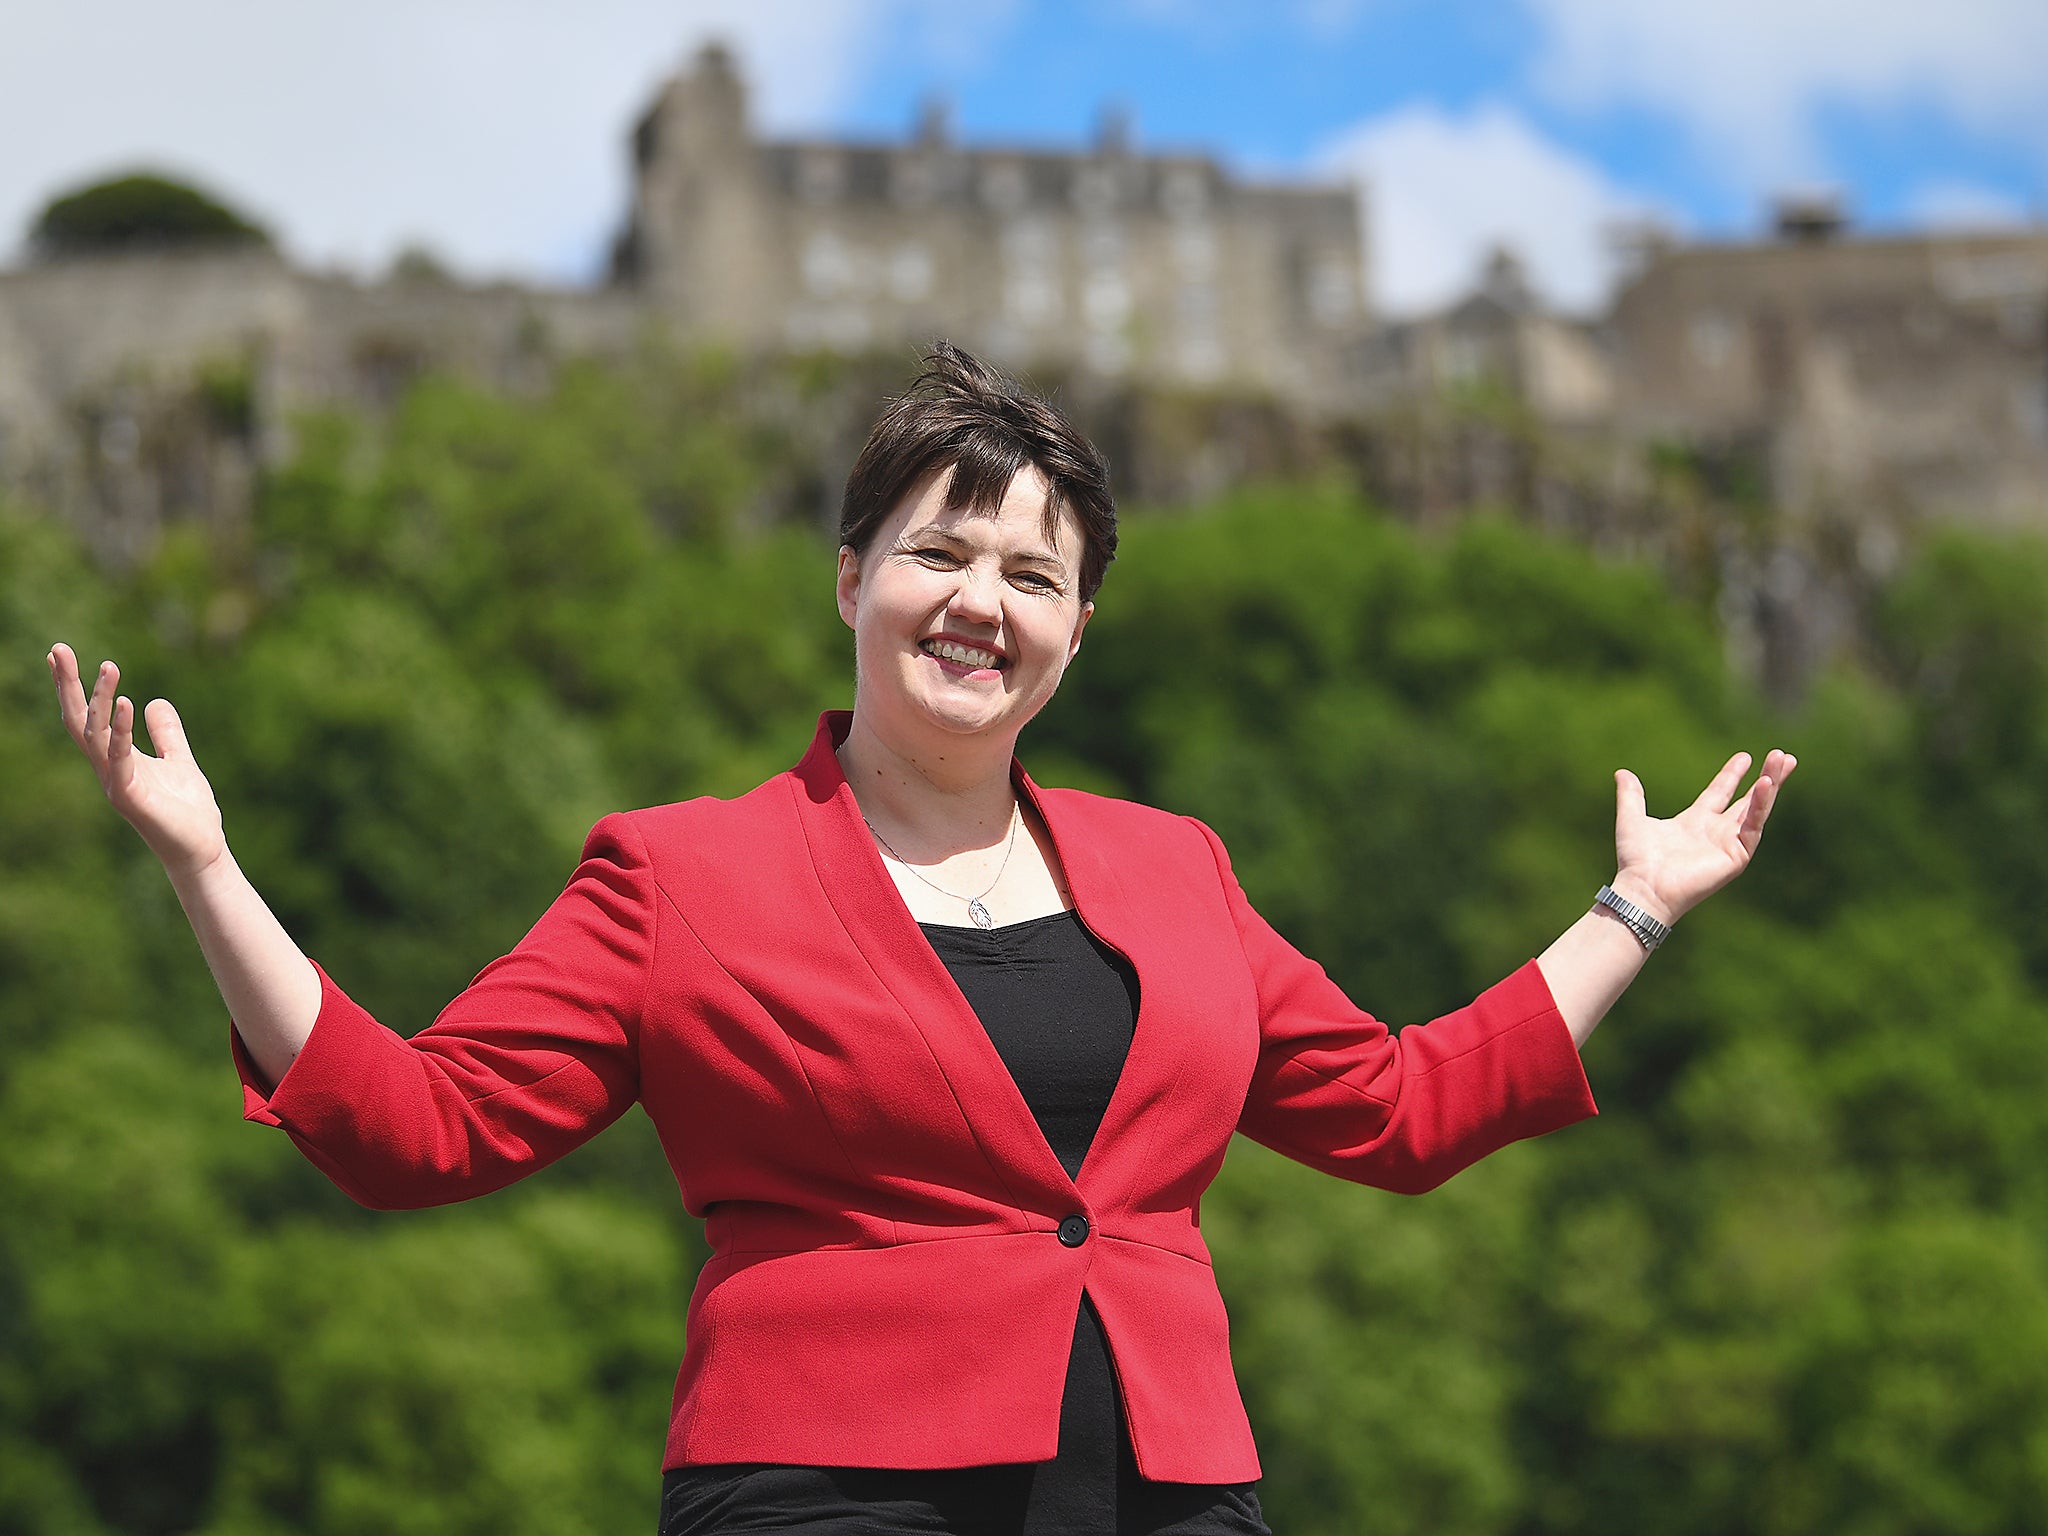 Ruth Davidson has put the Scottish Conservatives back on the political map